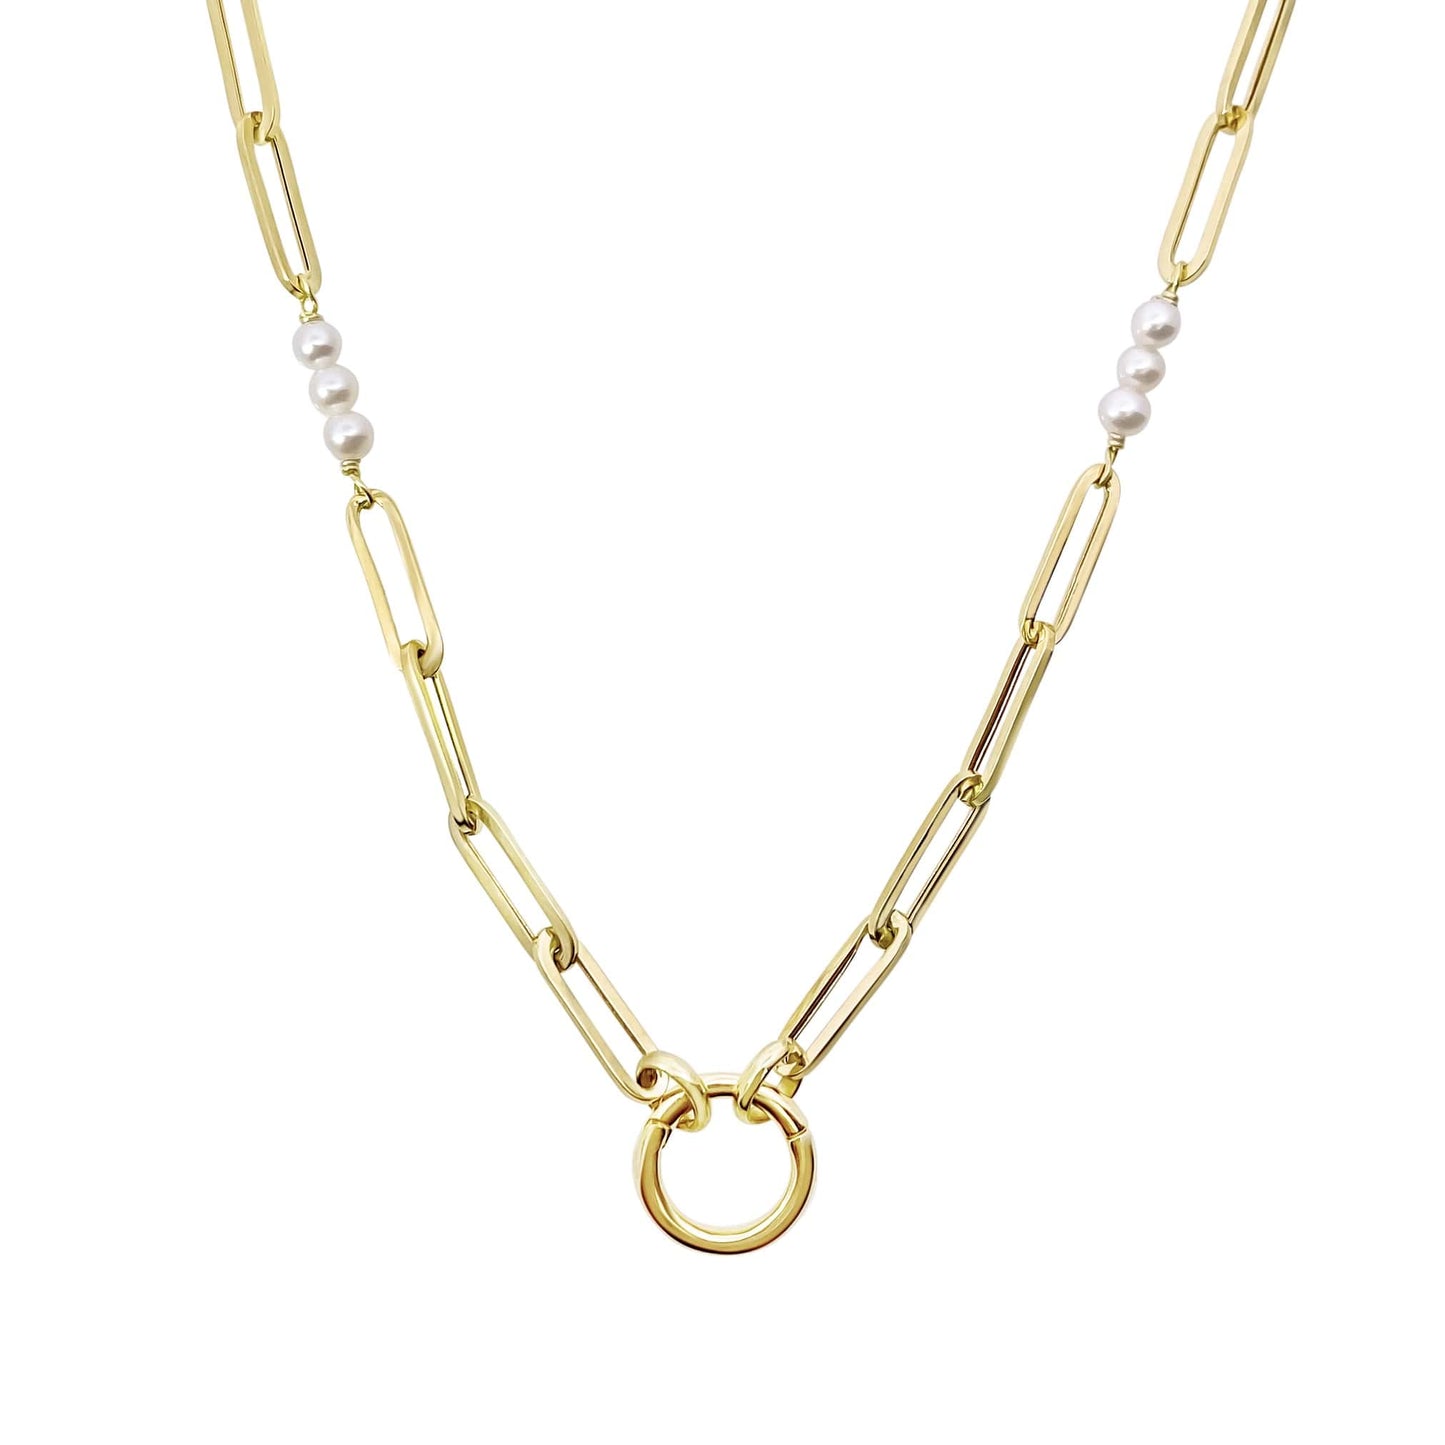 Paperclip and Pearl Chain with Charm Connector